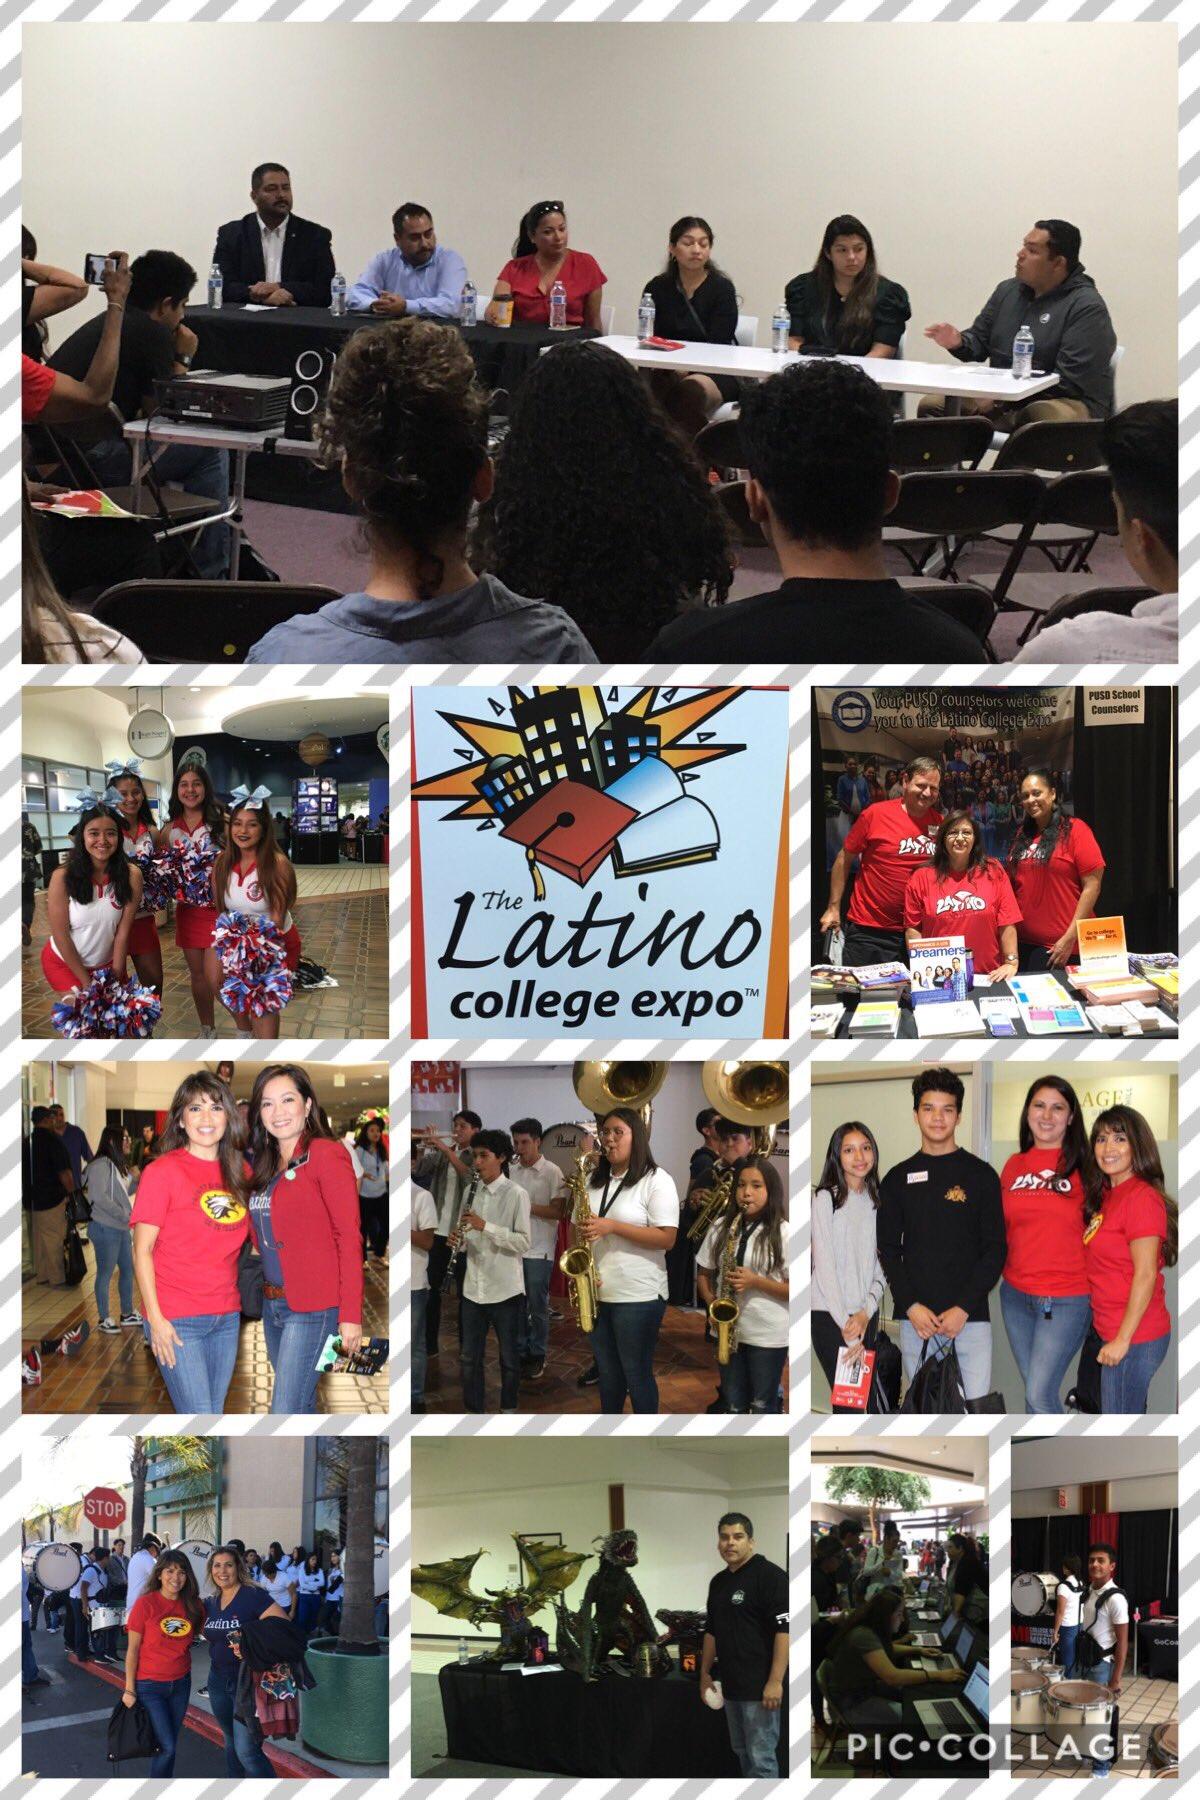 Alcott was at the Latino College Expo